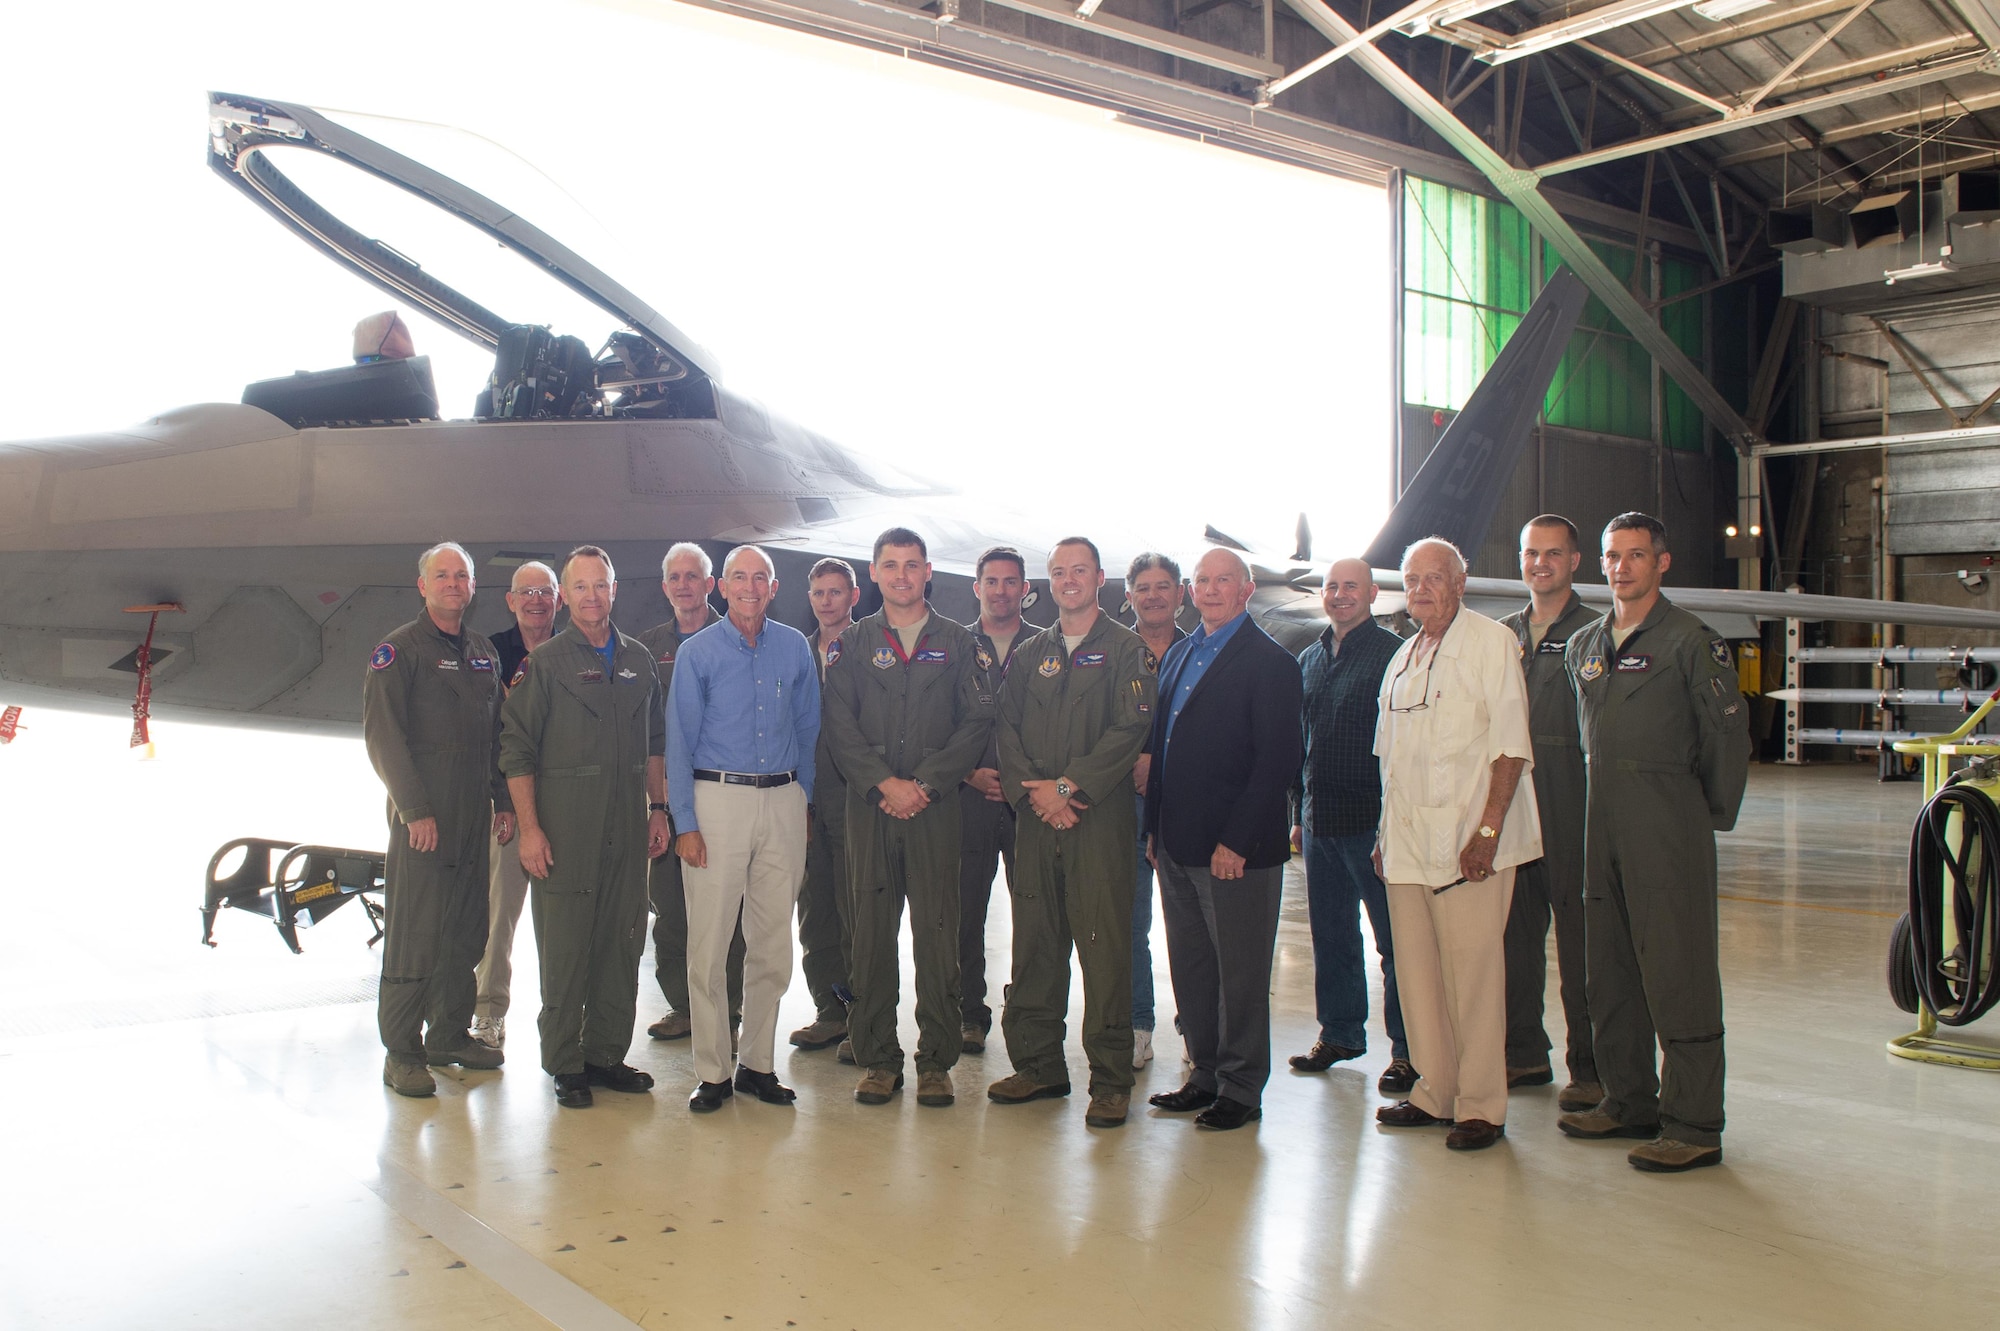 Members of the F-22 Combined Test Force and special guests pose for a photo in front of one the CTF’s F-22 Raptors. The CTF held a ceremony Oct. 19 to commemorate the first flight of the F-22. (U.S. Air Force photo by Jennifer Correa)